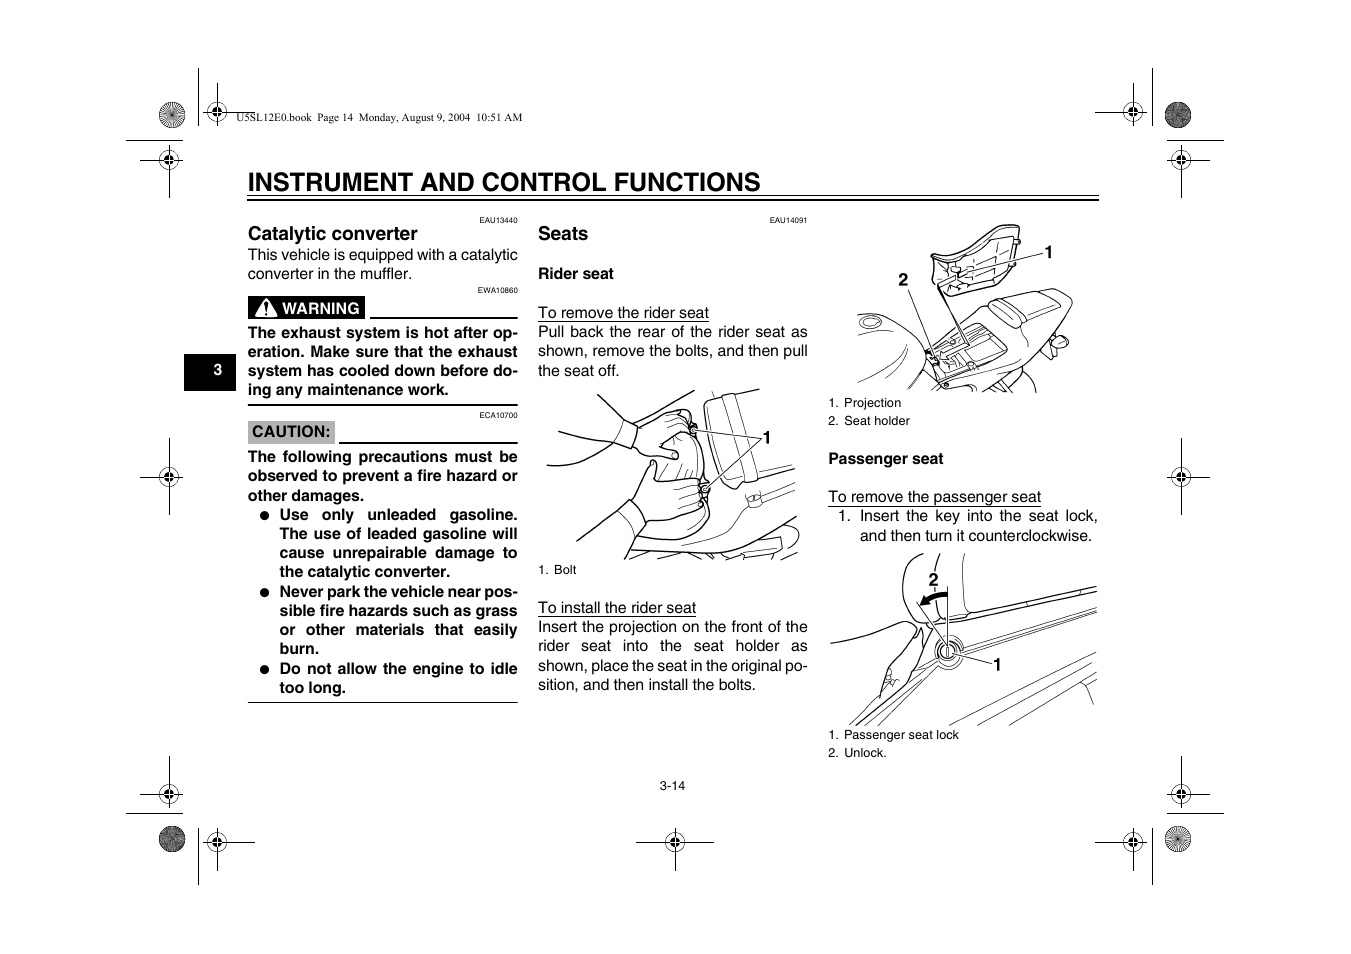 Catalytic converter -14 seats -14, Instrument and control functions | Yamaha YZF-R6T(C) User Manual | Page 32 / 111